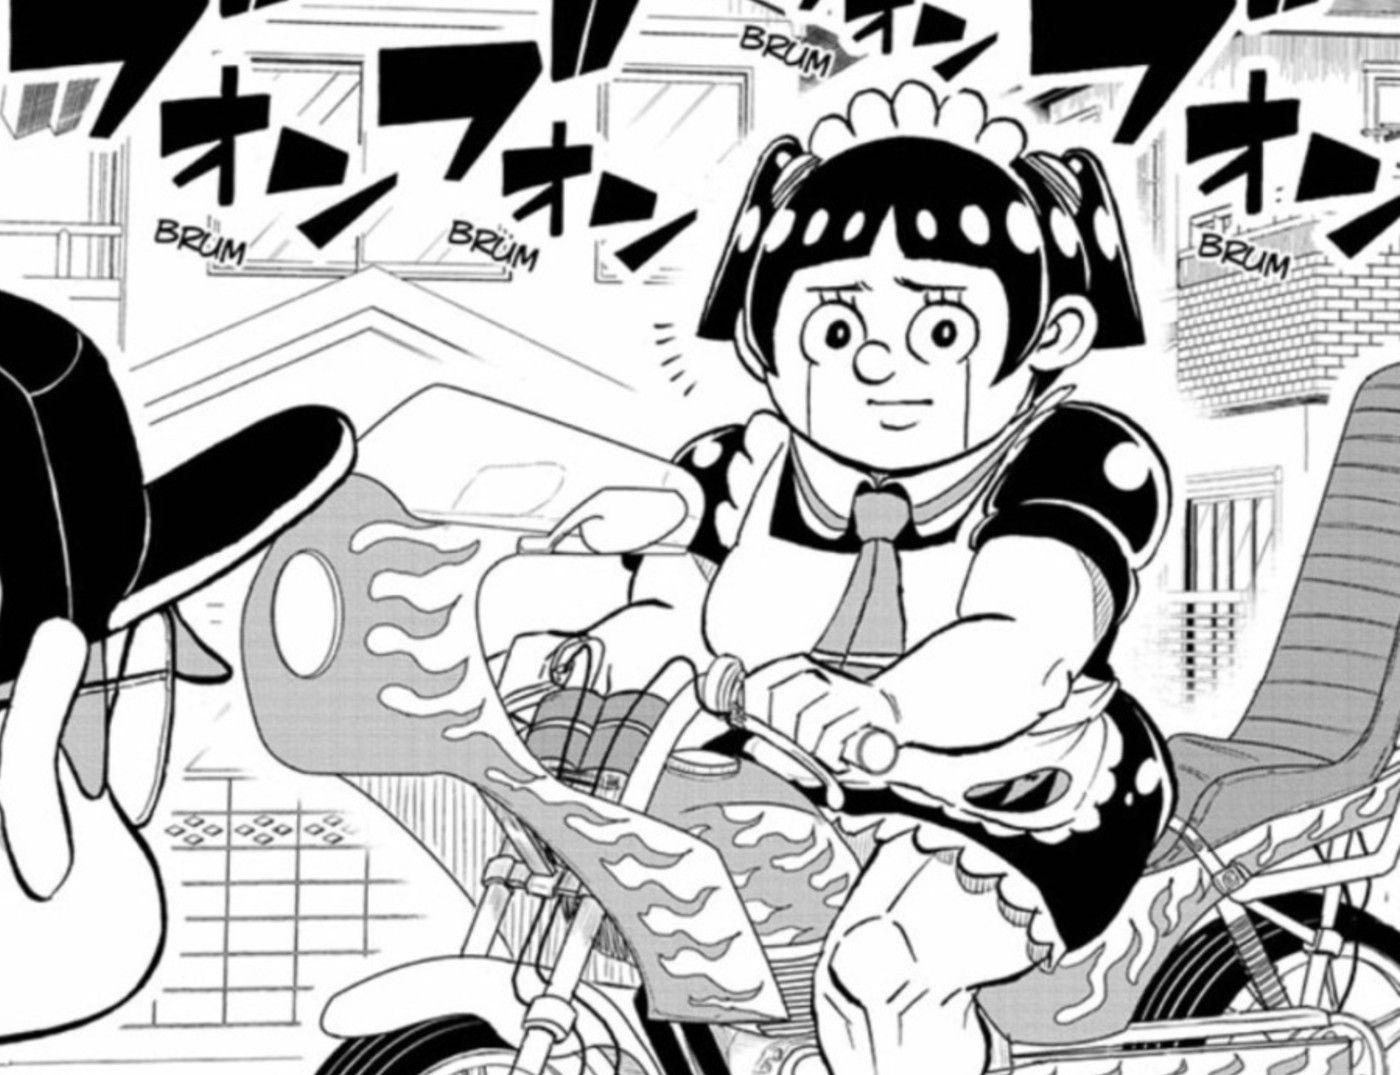 Me & Roboco Brings Old School Manga To a New Generation